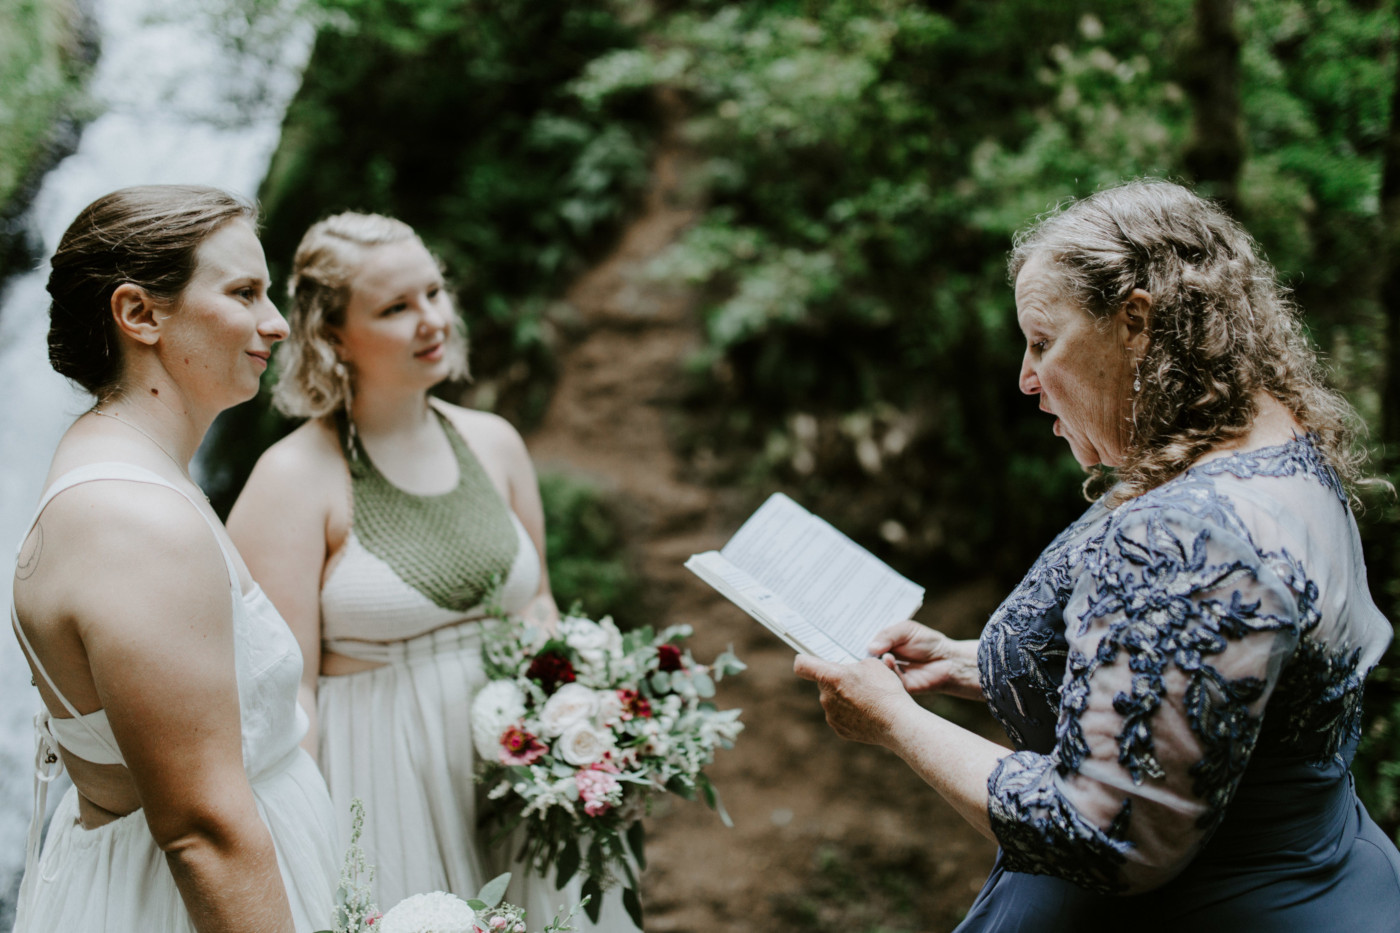 Audrey and Kate stand in front of Kate's mom as she officiates at Bridal Veil Falls. Elopement wedding photography at Bridal Veil Falls by Sienna Plus Josh.